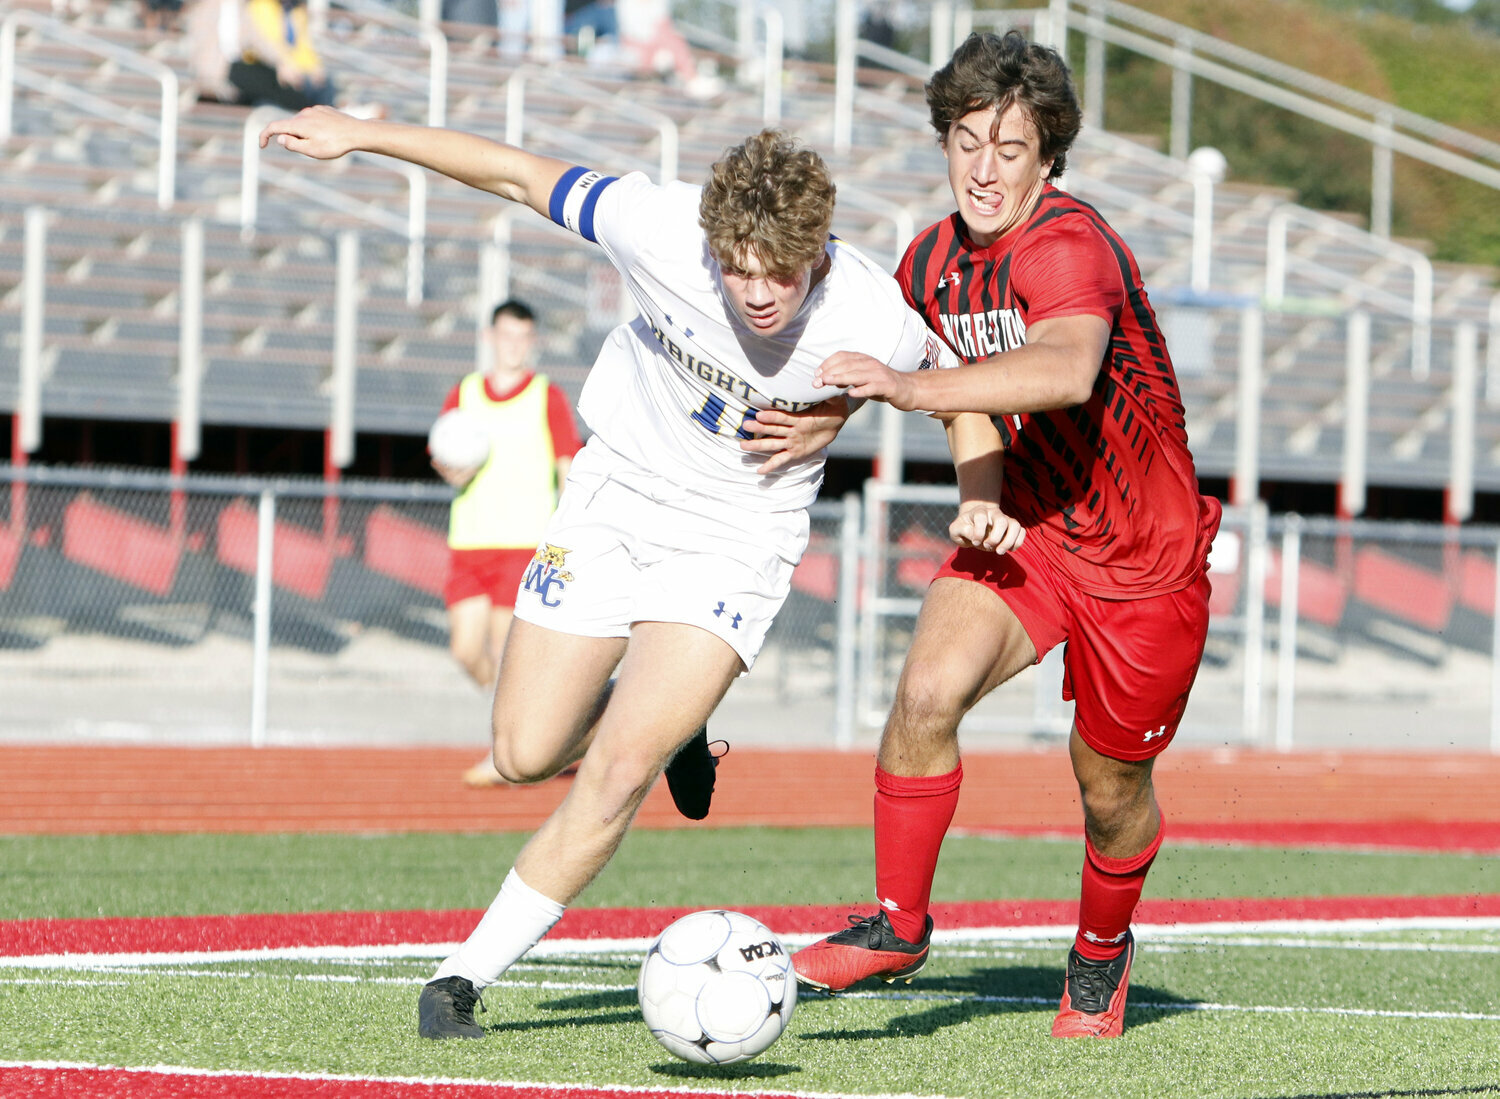 Nate Bowman attempts to move towards the goal during a regular season game against Warrenton.